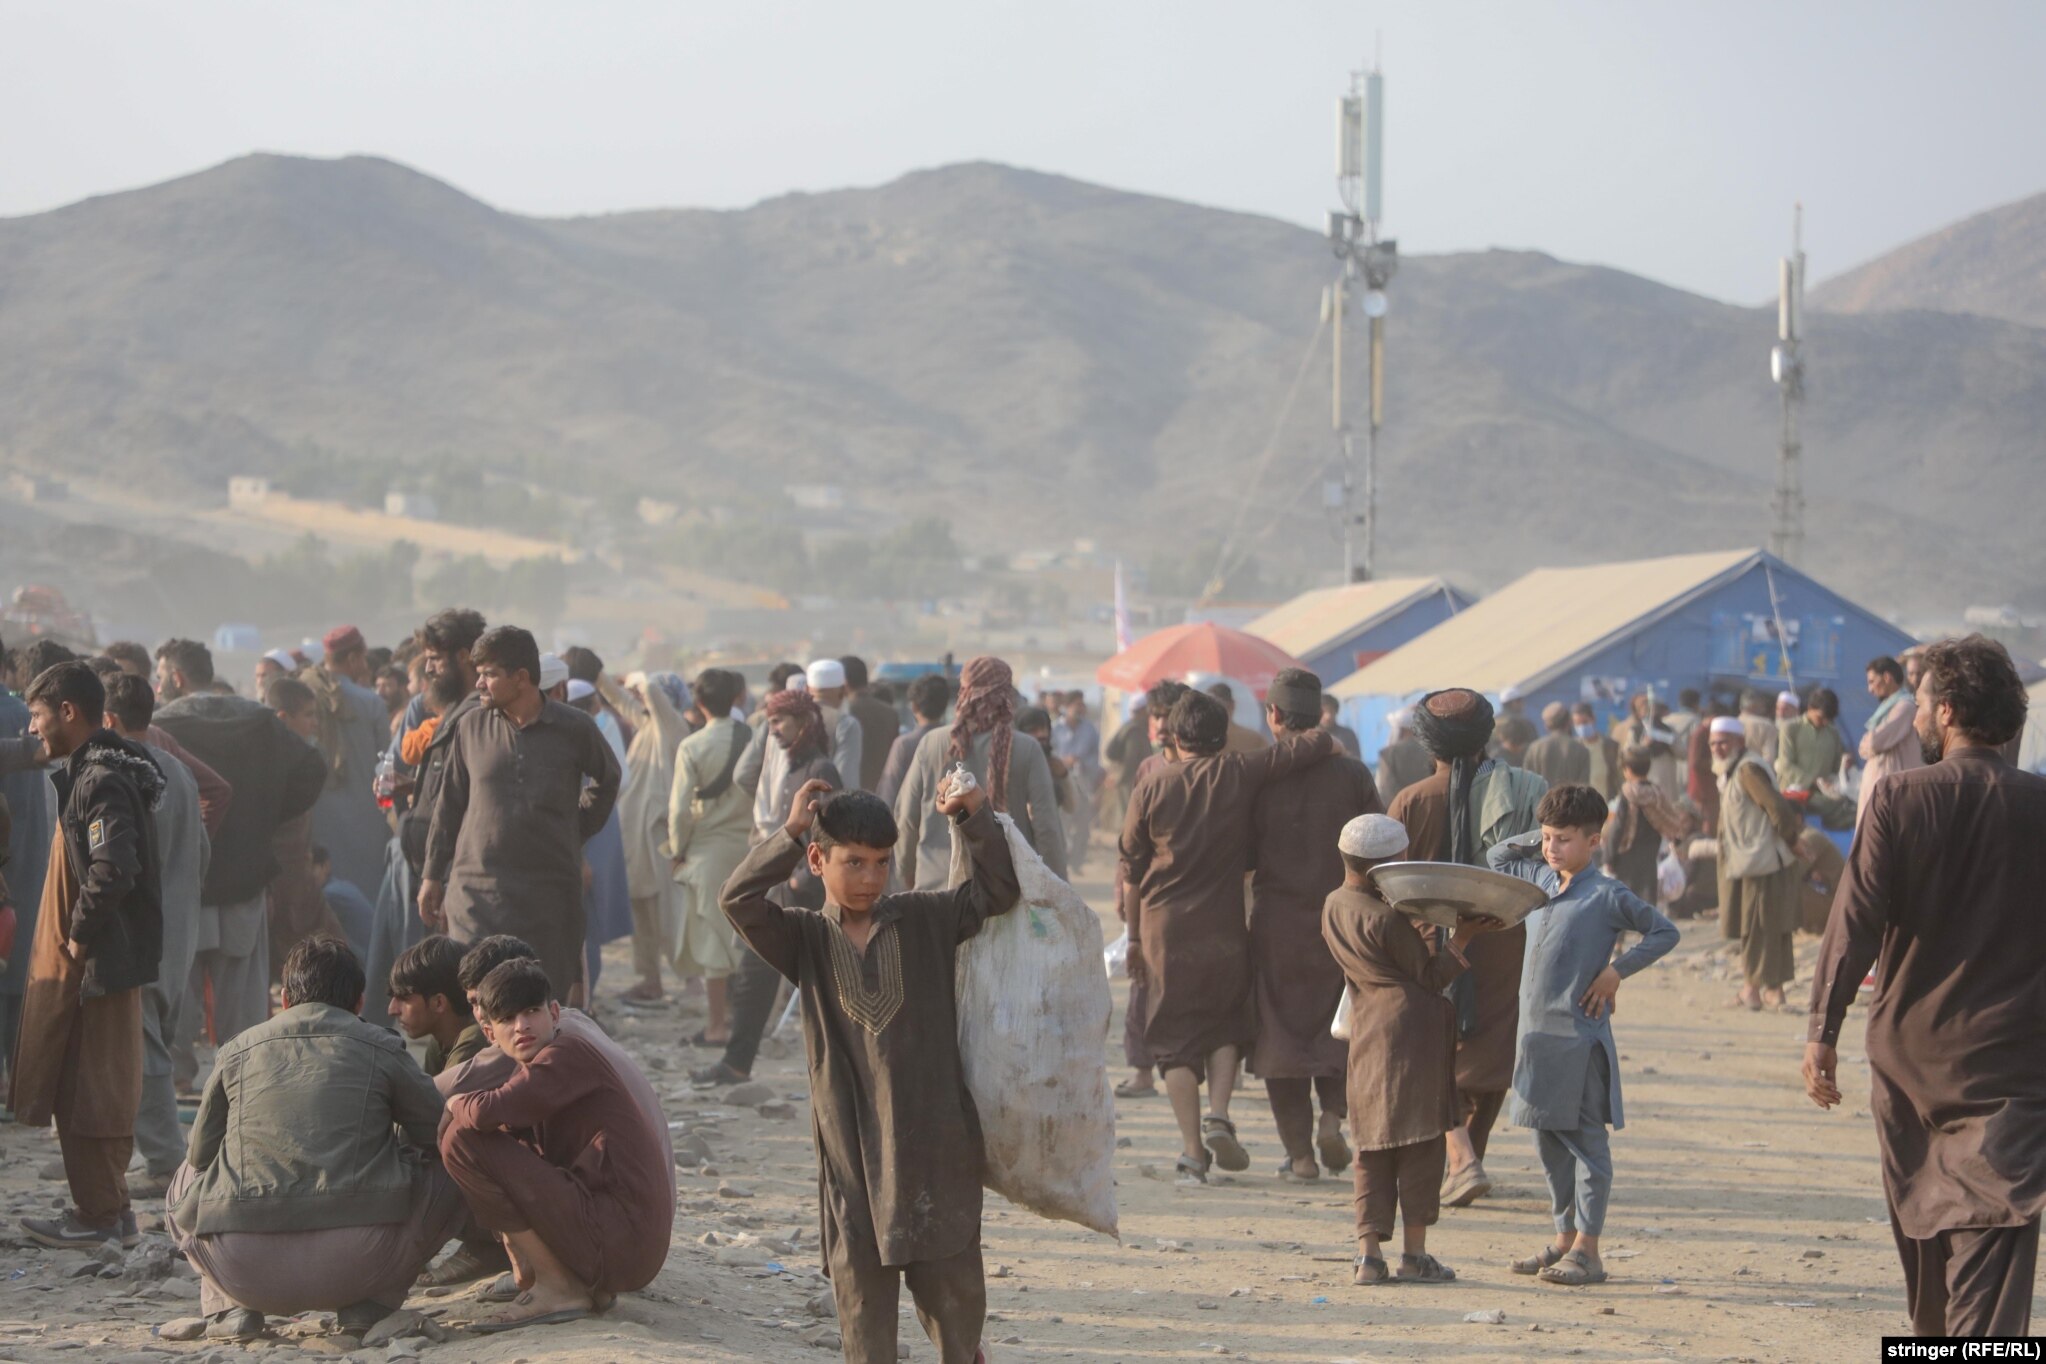 A large number of Afghans are in need of humanitarian aid after losing their possessions and livelihoods in Pakistan.